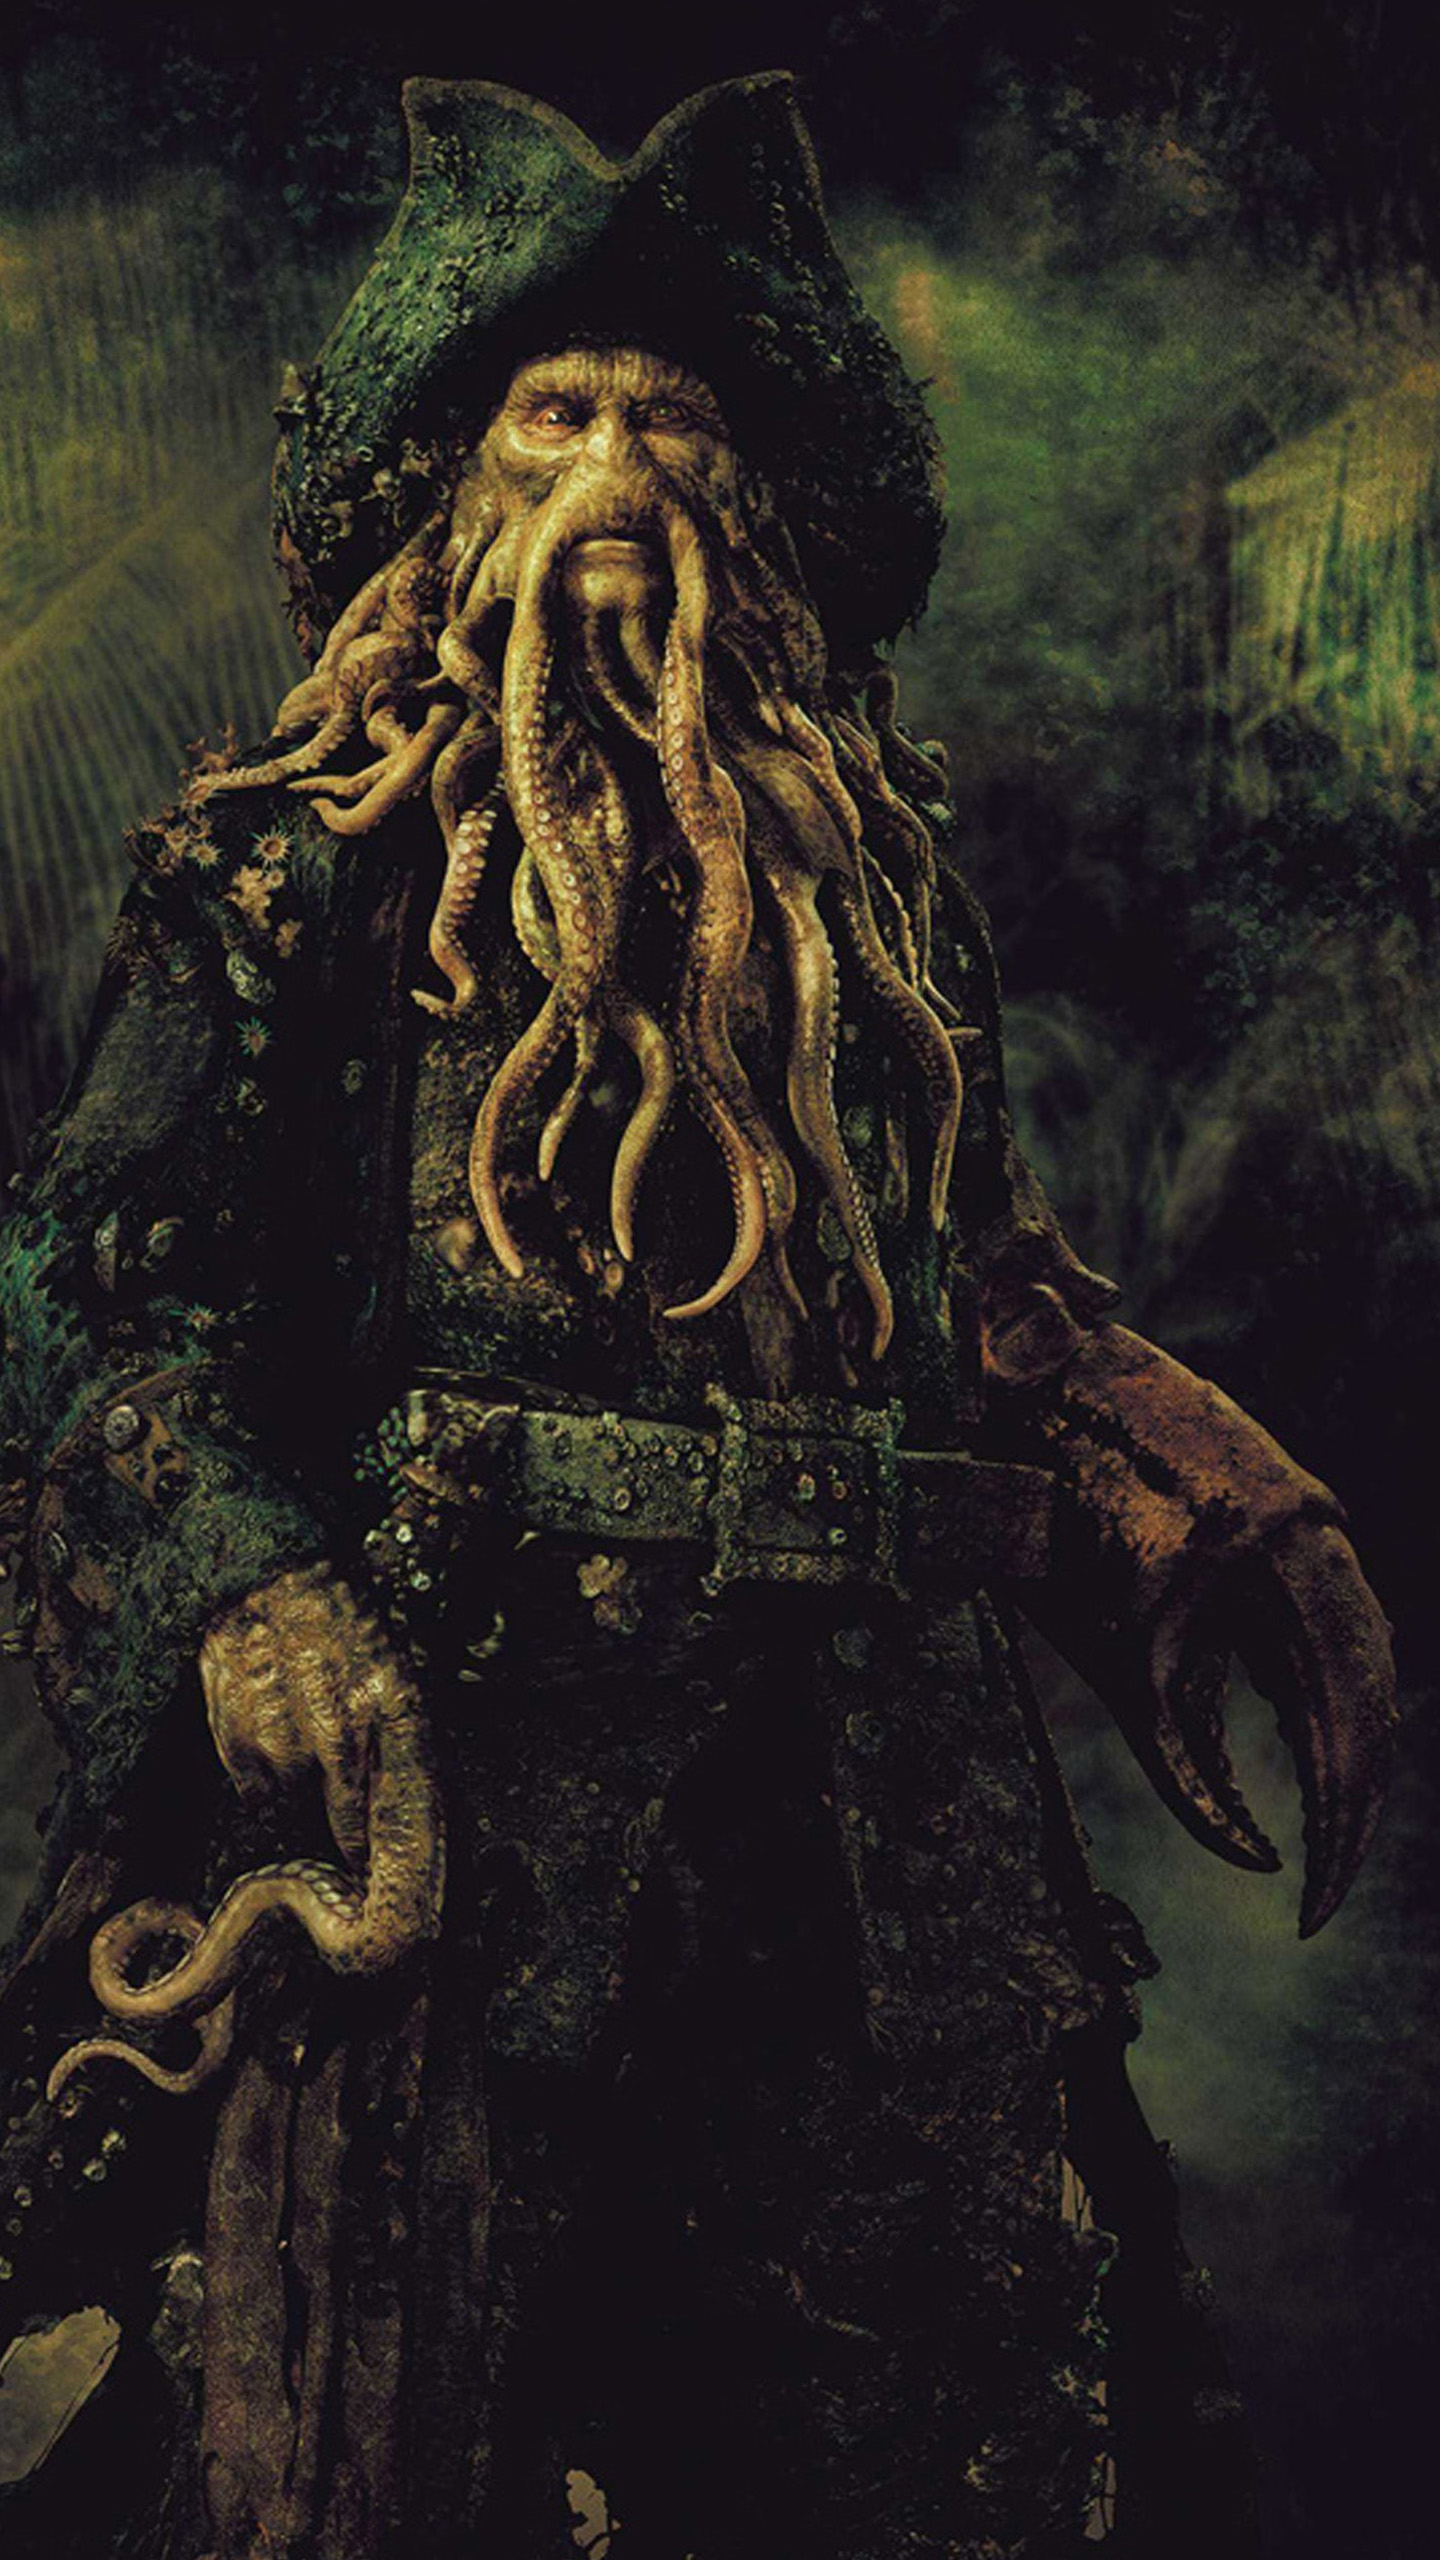 pirates of the caribbean wallpaper for android,hairstyle,cg artwork,long hair,mythology,beard